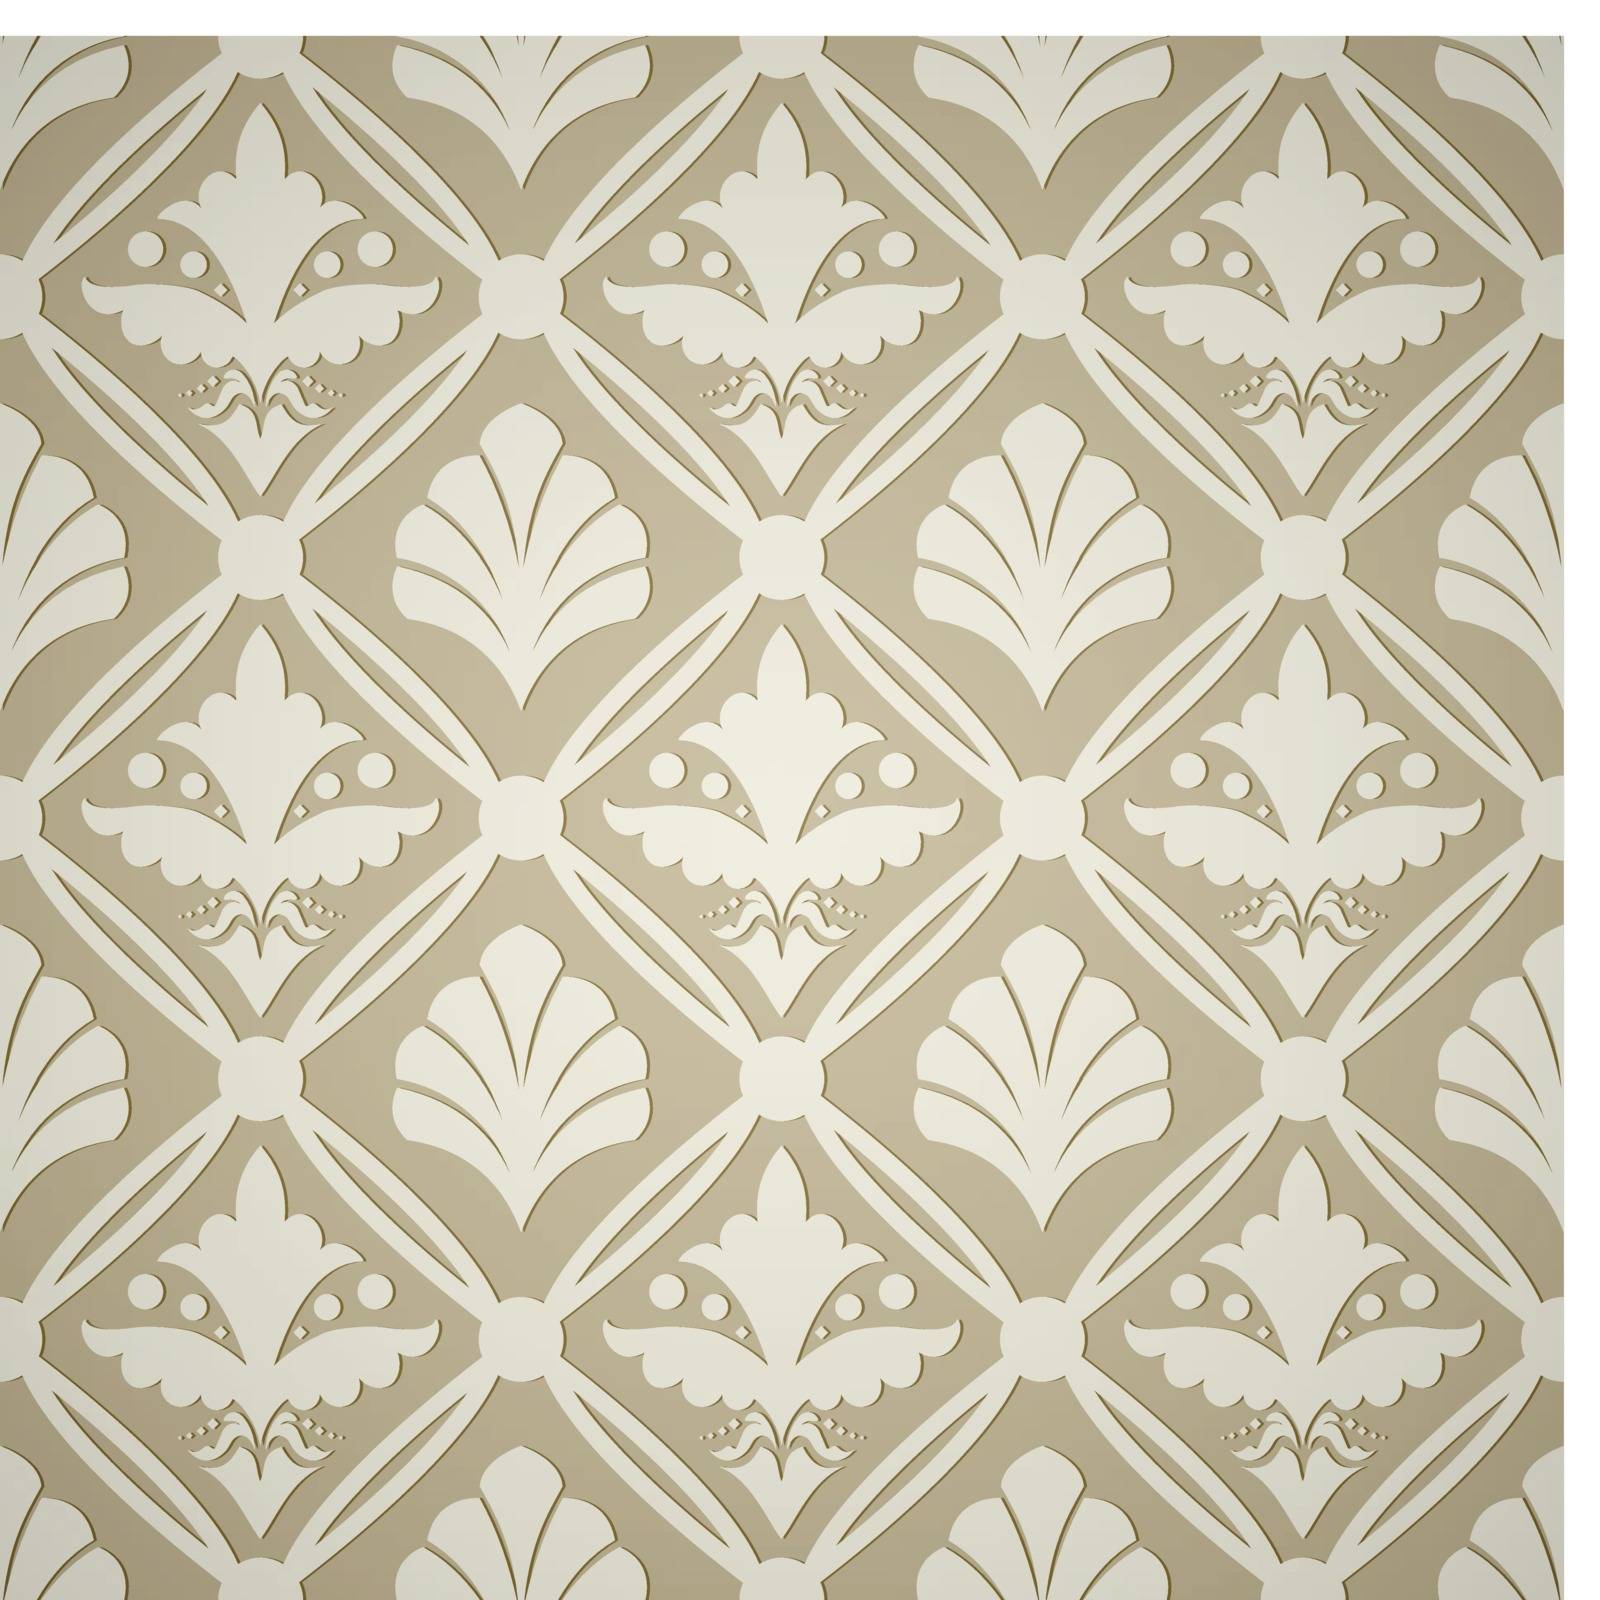 Seamless floral background in beige colors